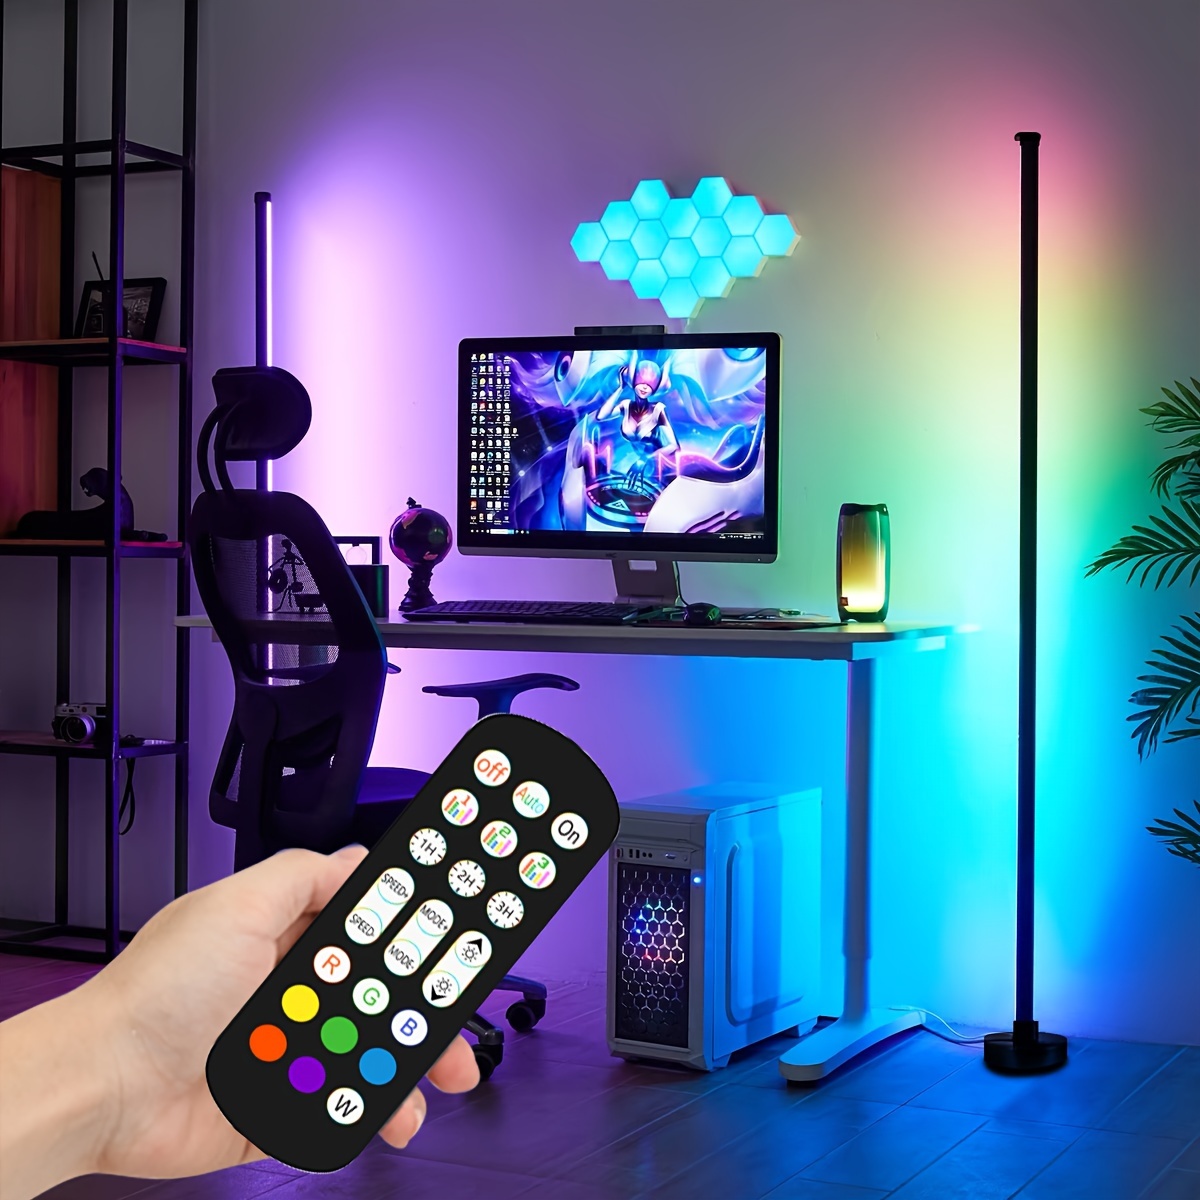 1pc 2pcs led smart floor lamp rgb dimmable pastel light with music function and timer usb lamp can be connected with remote control suitable for bedroom living room game room decorative atmosphere lighting can increase quality of life eid al adha mubarak details 3